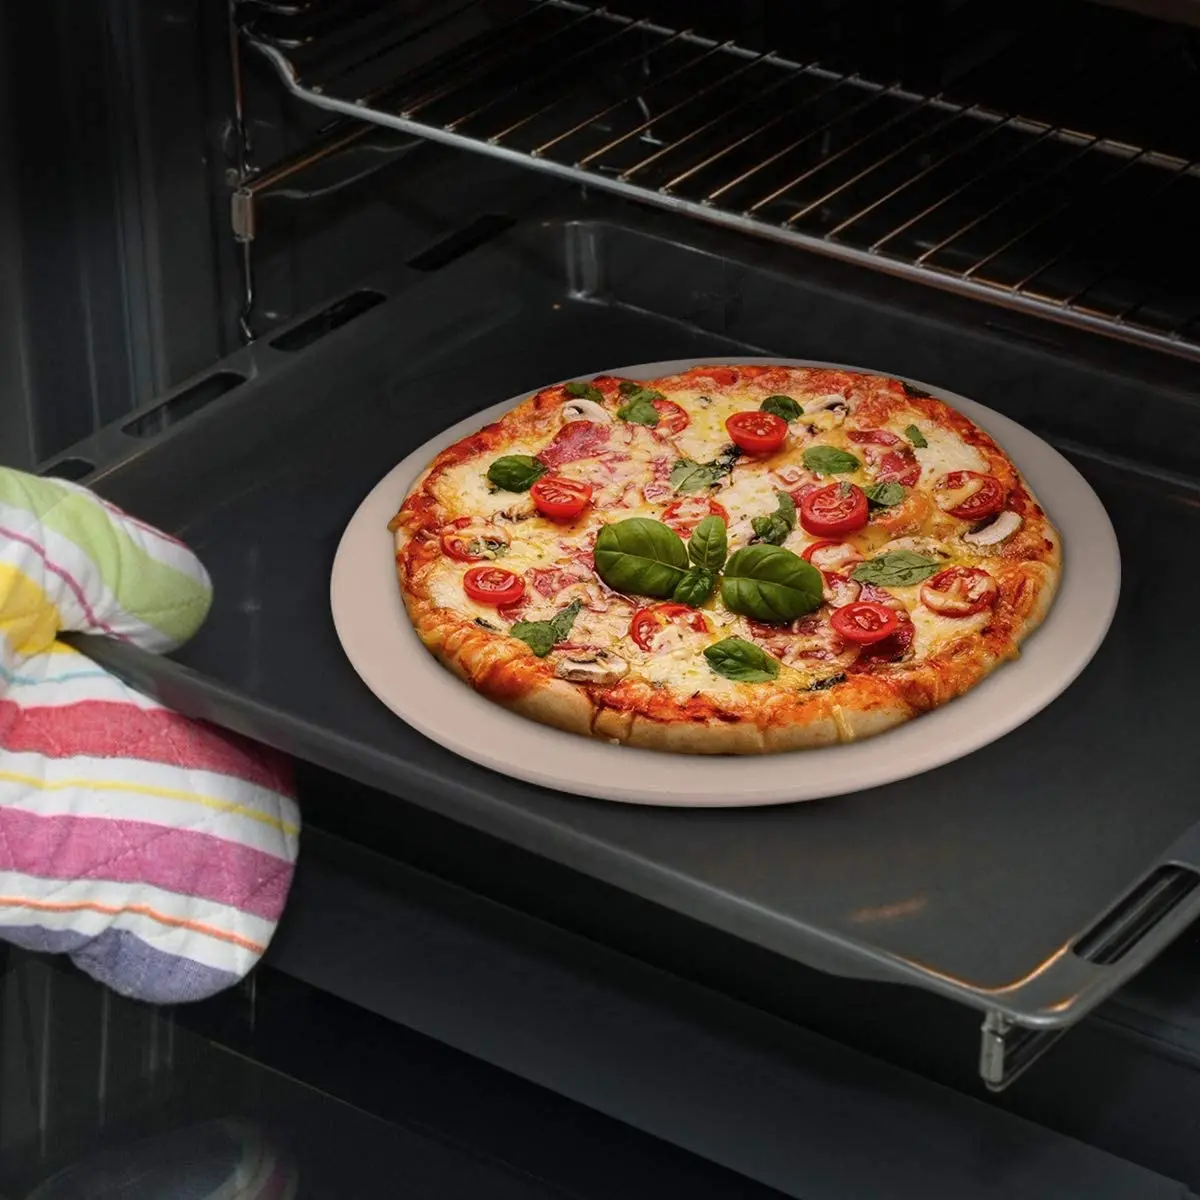 Lorrenzetti 16" Premium Pizza Stone for Baking Pizza in an Oven or BBQ Grill